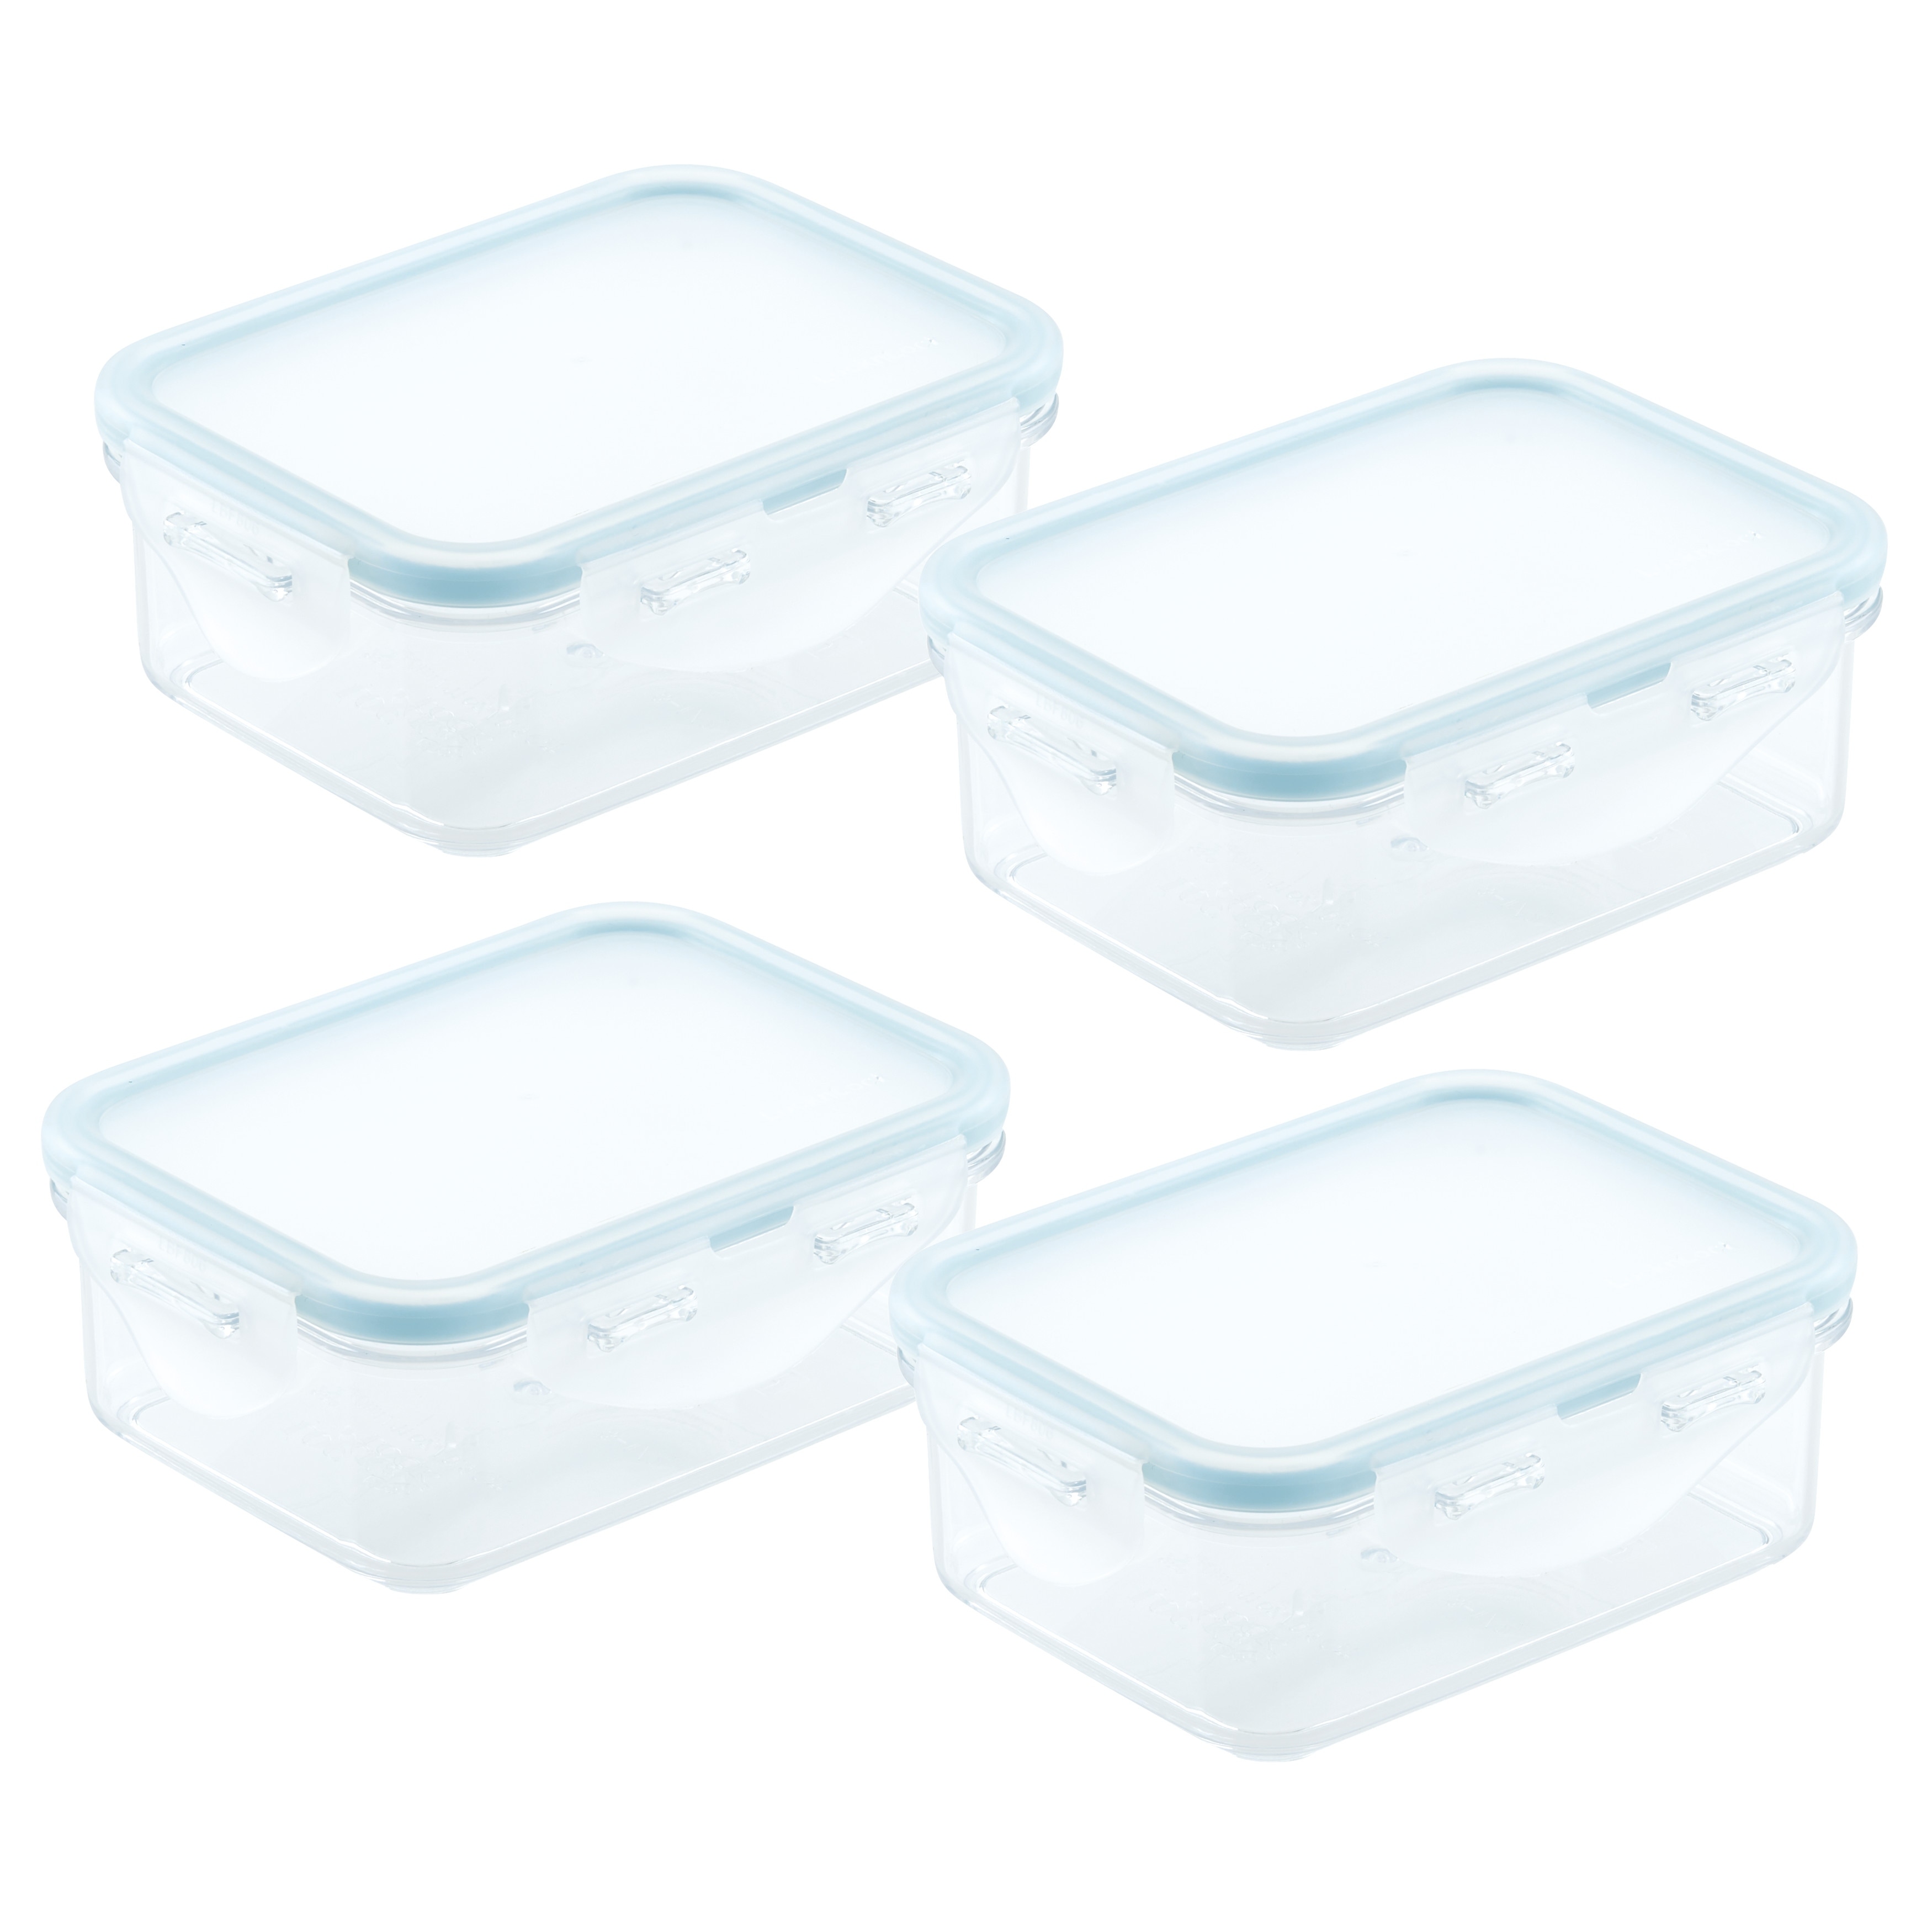 https://ak1.ostkcdn.com/images/products/is/images/direct/4e1fe27b1fbb2332d5c5dda9c1a2e7dce3544a4b/LocknLock-Purely-Better-Rectangular-Food-Storage-Containers%2C-12-Ounce%2C-Set-of-4.jpg